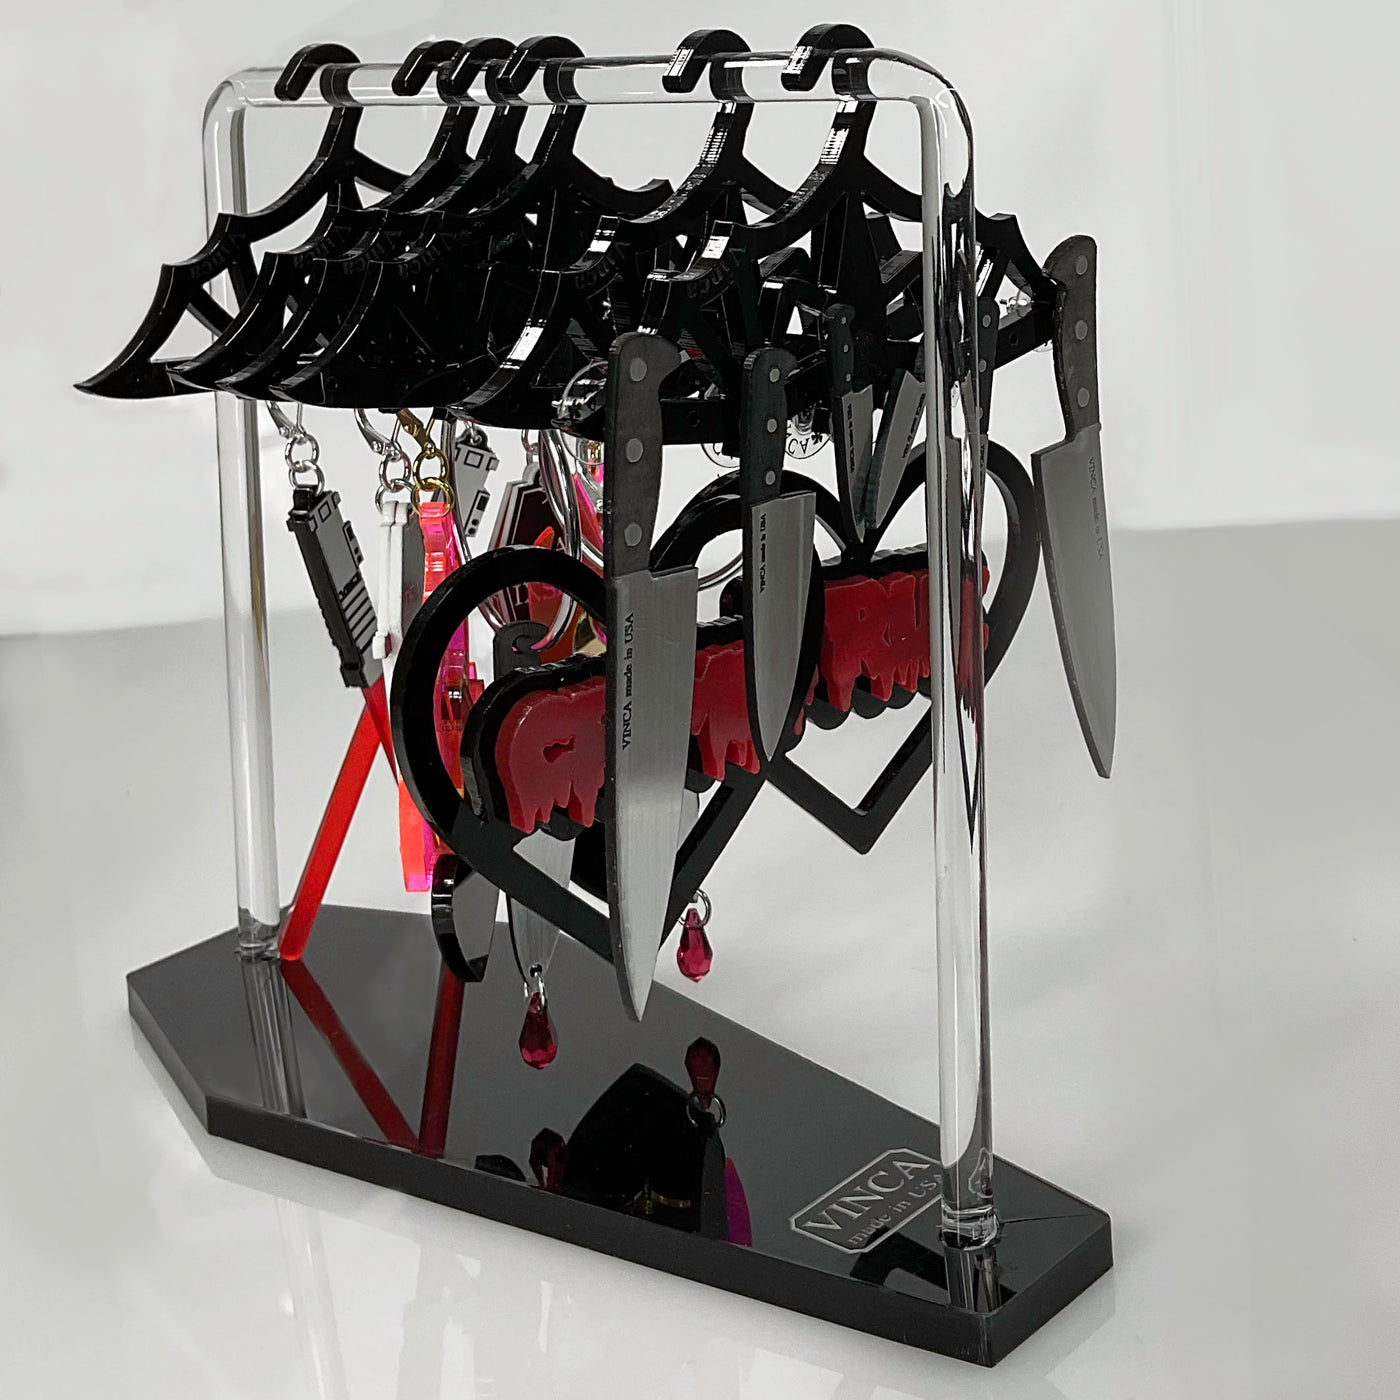 Hang in There! Adorable Dresser-Top Earring Organizer - Just Batty Hanger Style with Coffin base